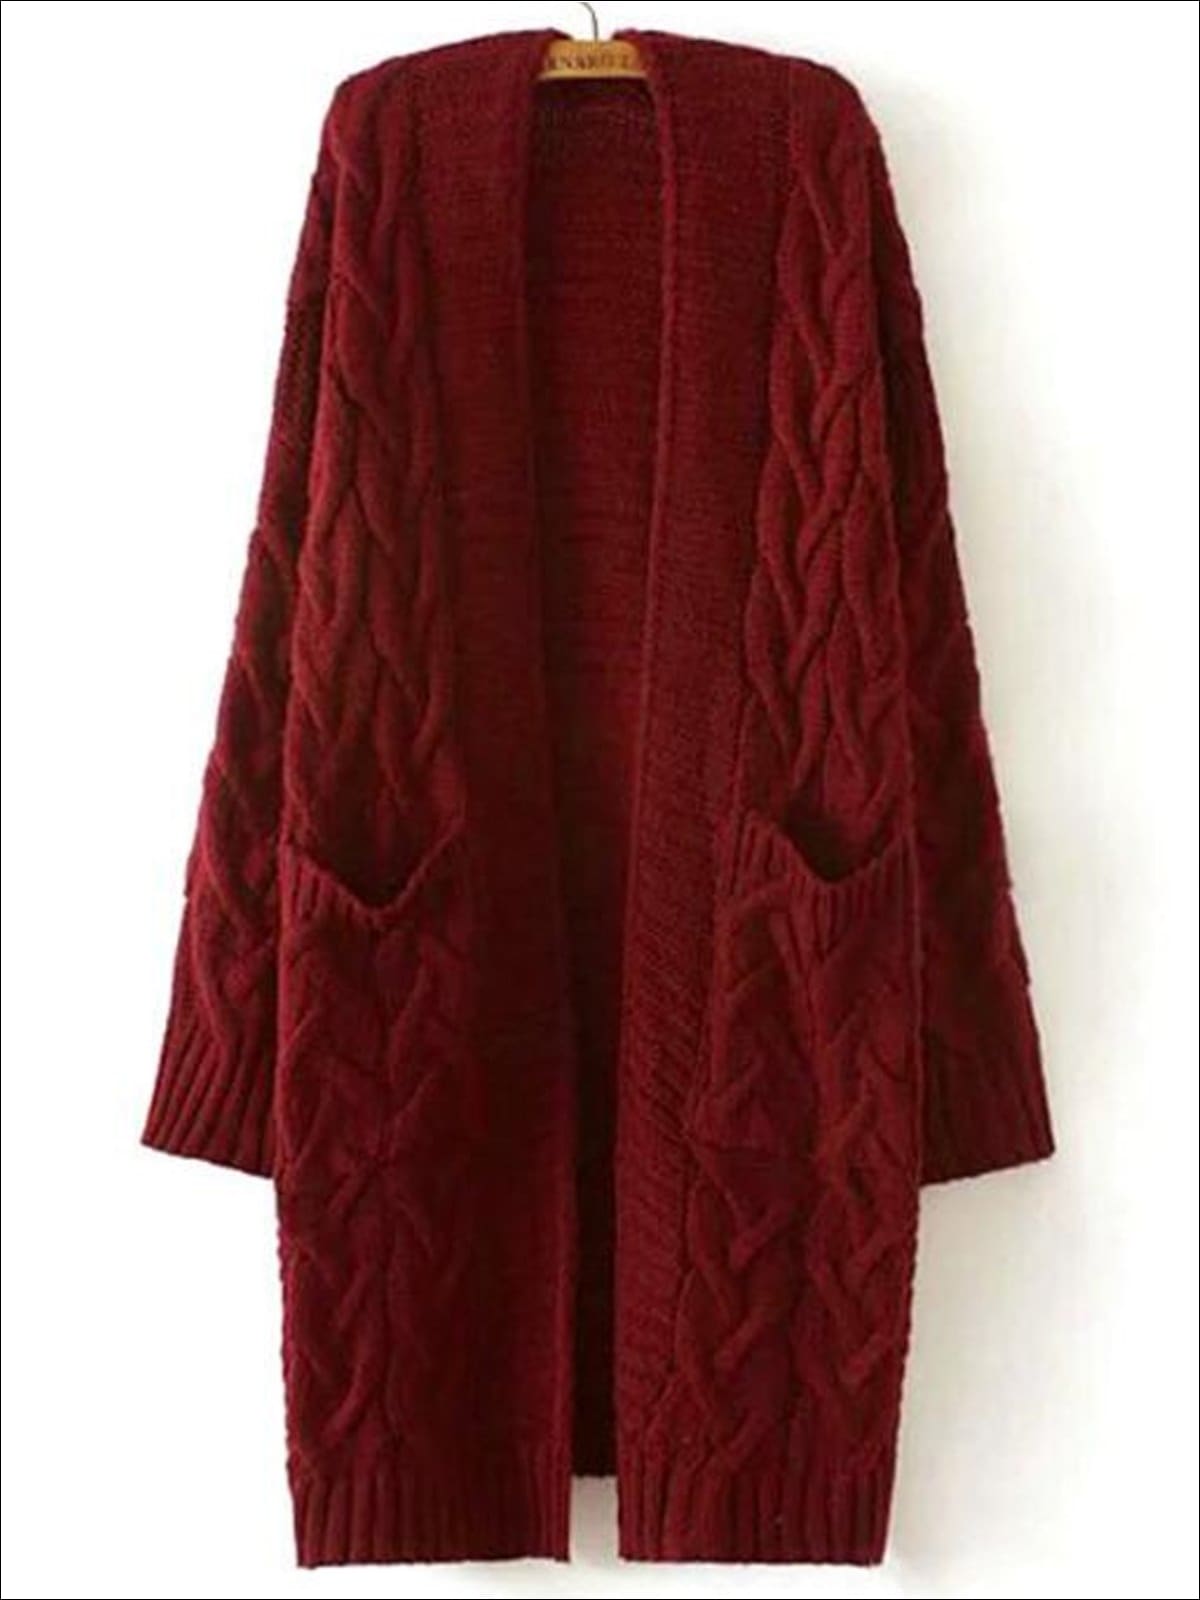 Womens Over-Sized Cable Knit Fall Cardigan with Side Pockets - Burgundy / One - Womens Fall Outerwear